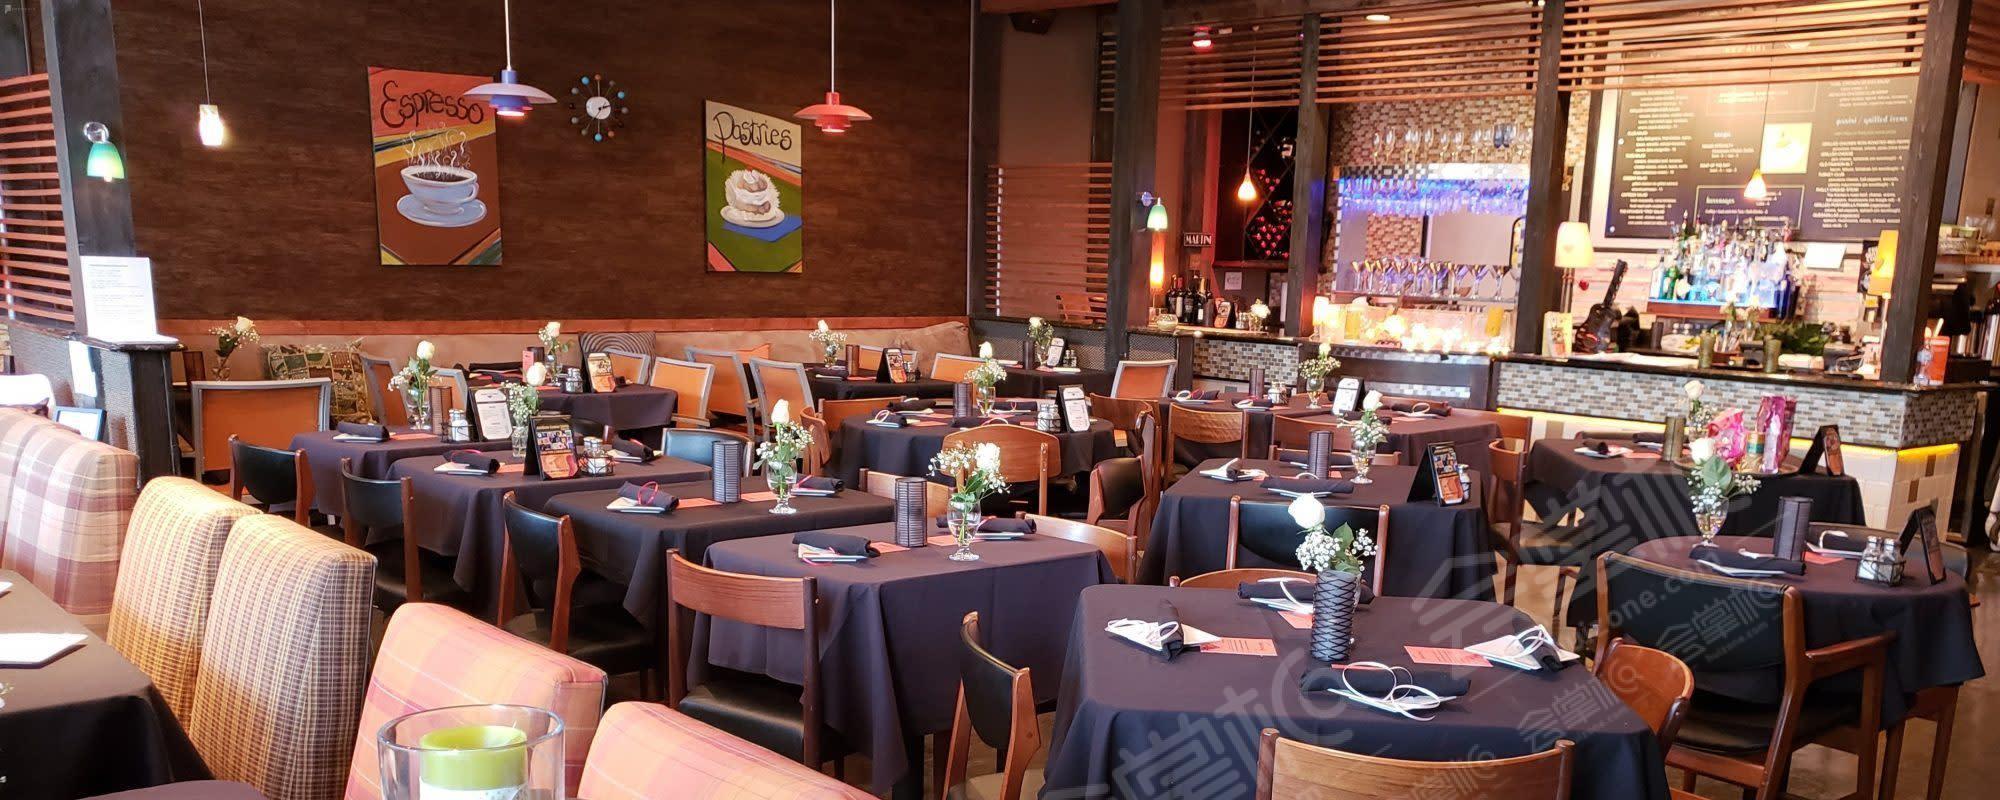 Host Your Next Showstopper Event at Our Restaurant with a Live Music Stage